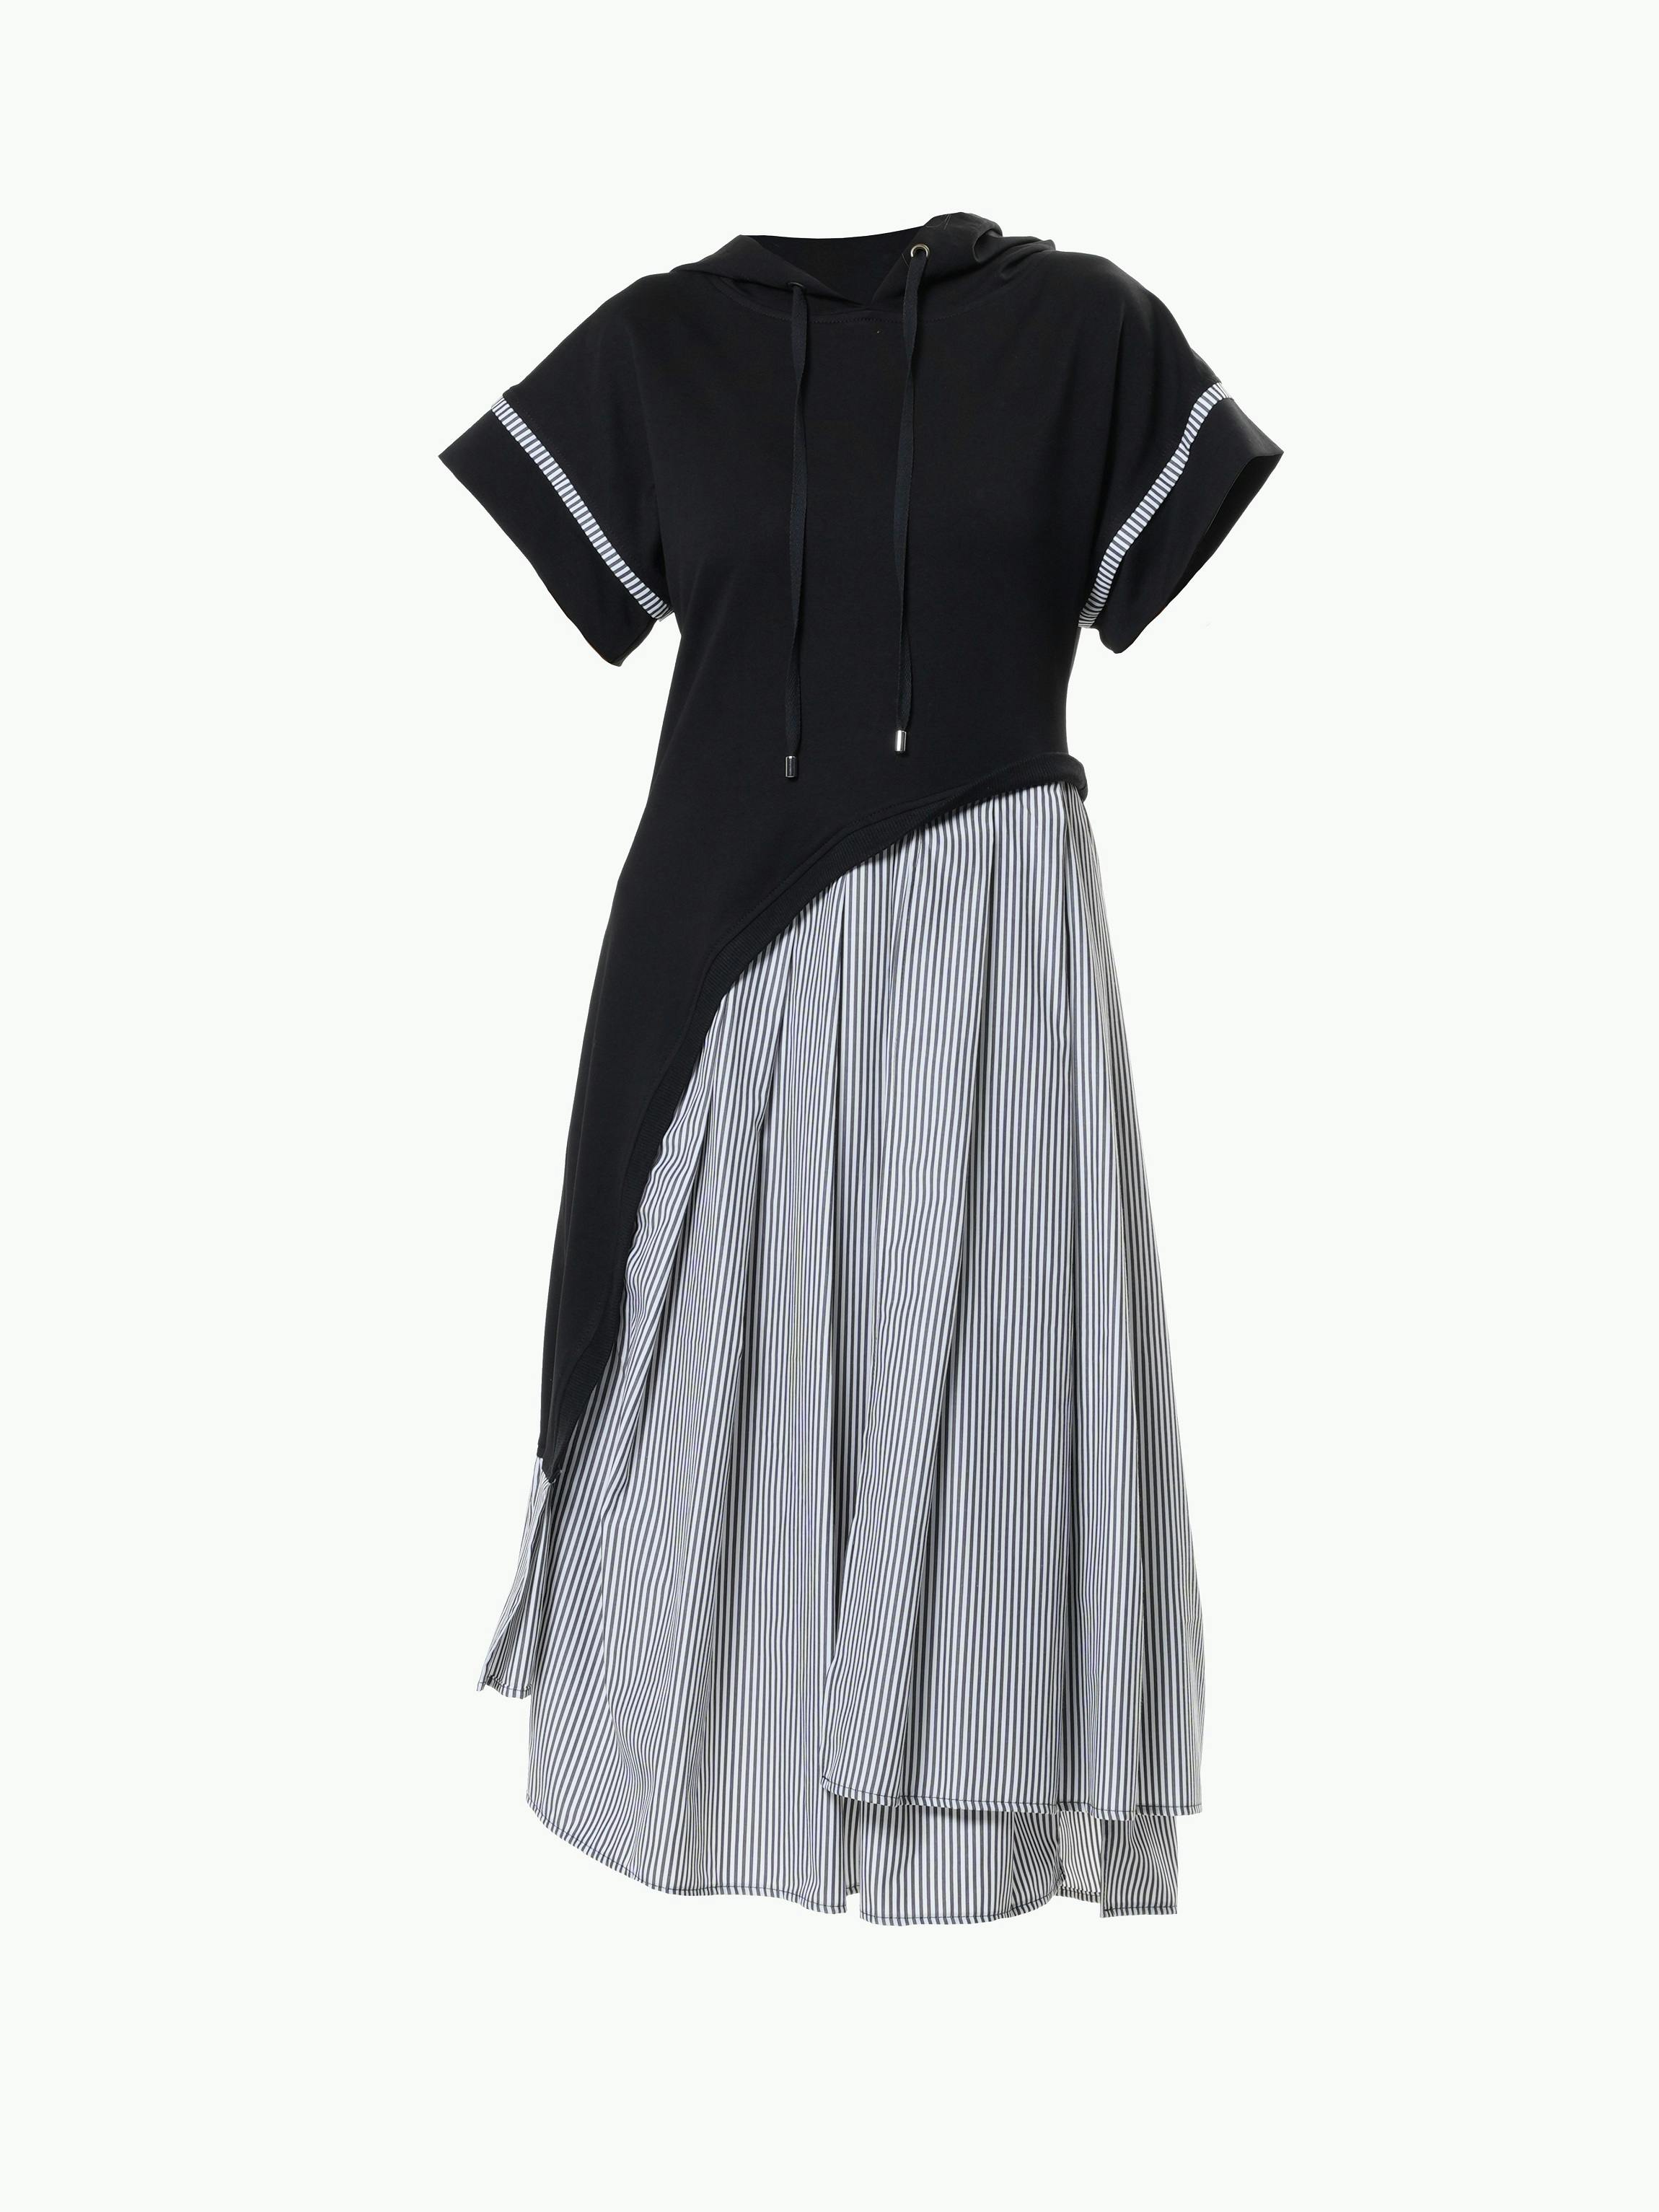 Thumbnail preview #3 for Asymmetric Hooded Dress With Short Sleeves 